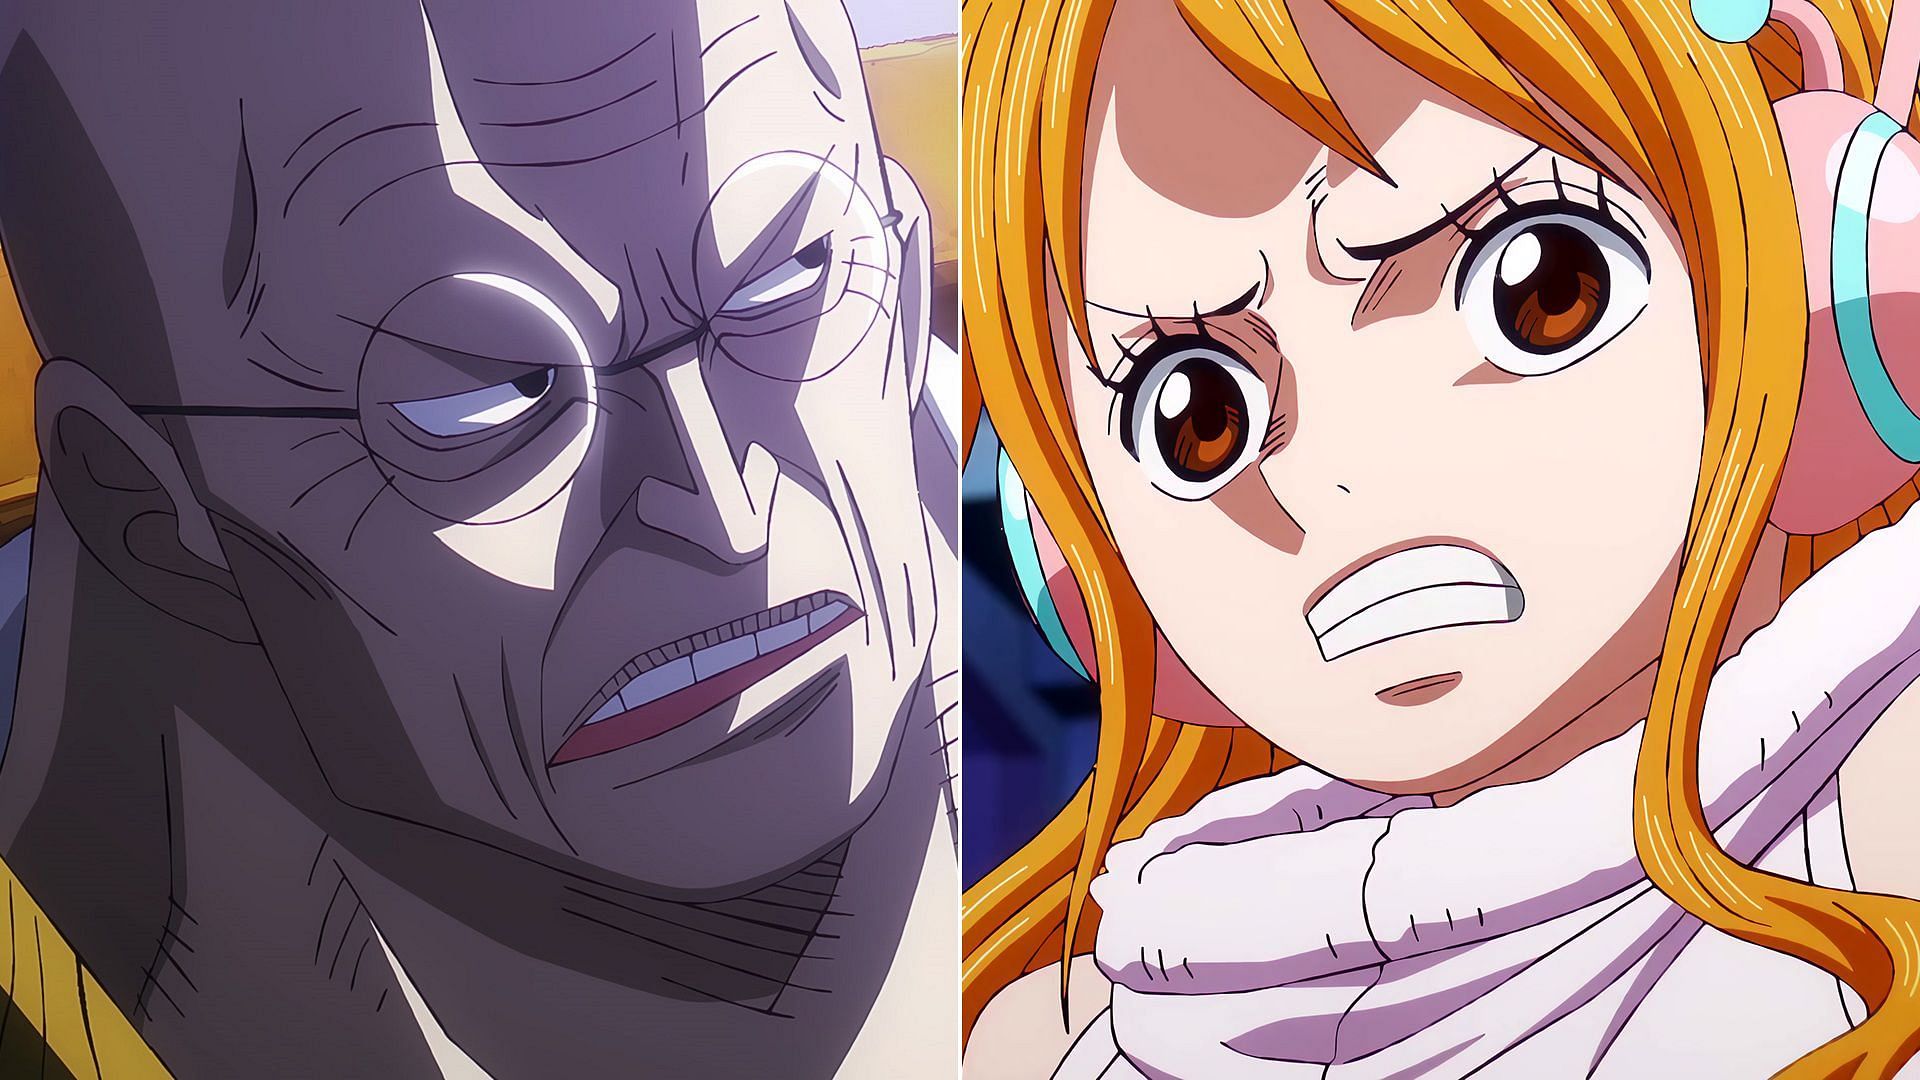 Nusjuro and Nami in the One Piece anime (Image via Toei Animation)